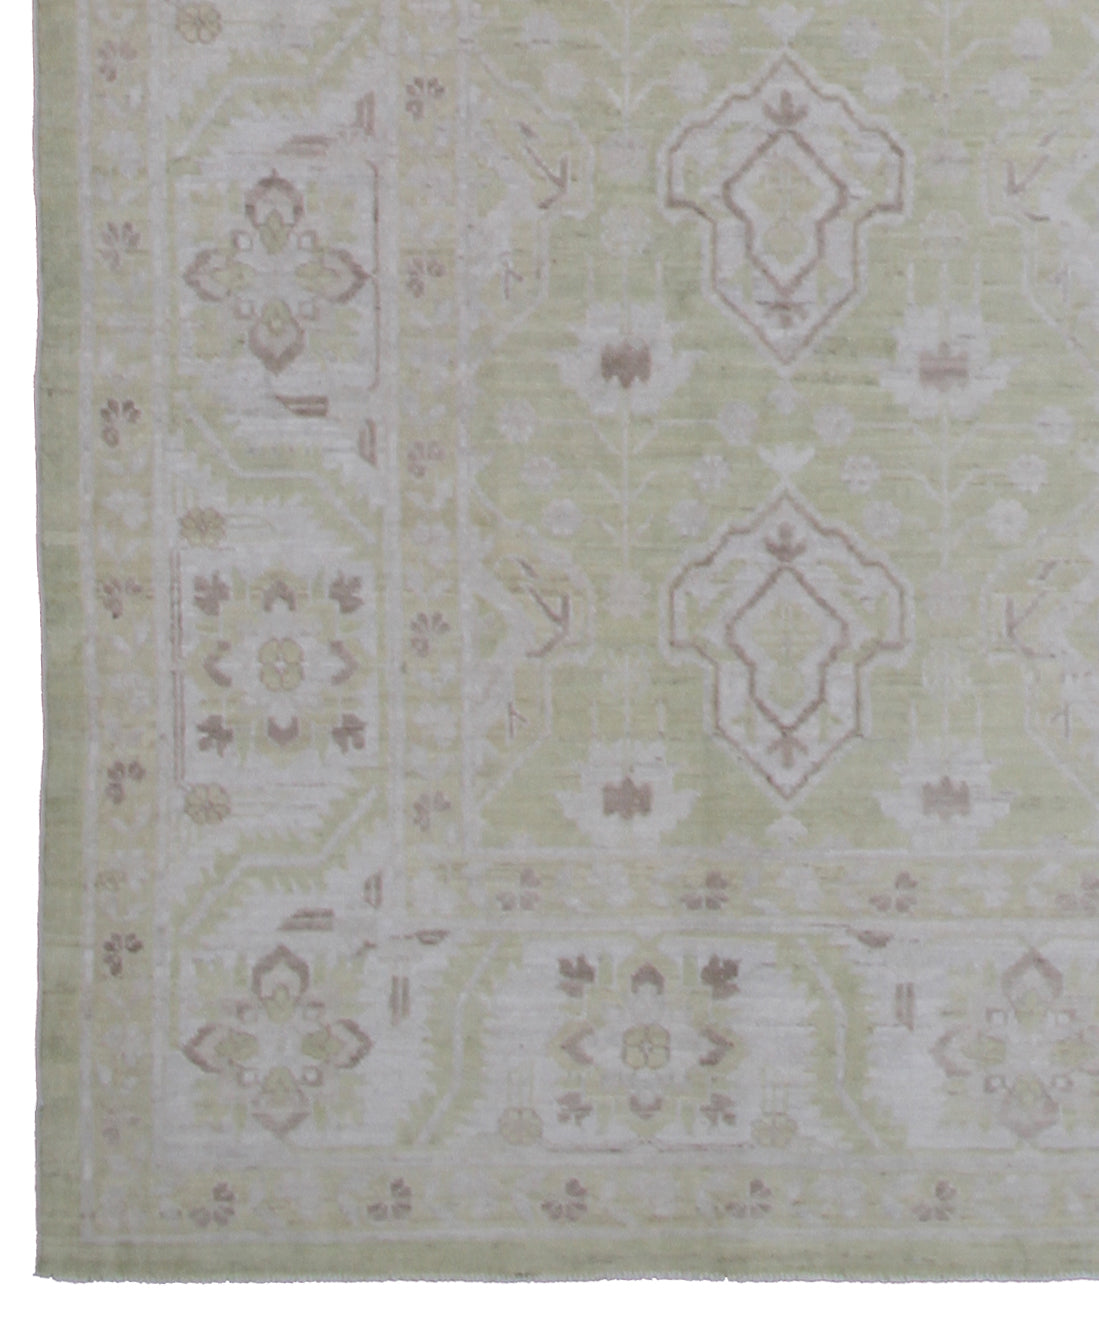 10.00 x 8.00 Heriz Shield Design With Soft Green and Cream Colors Ariana Traditional Rug